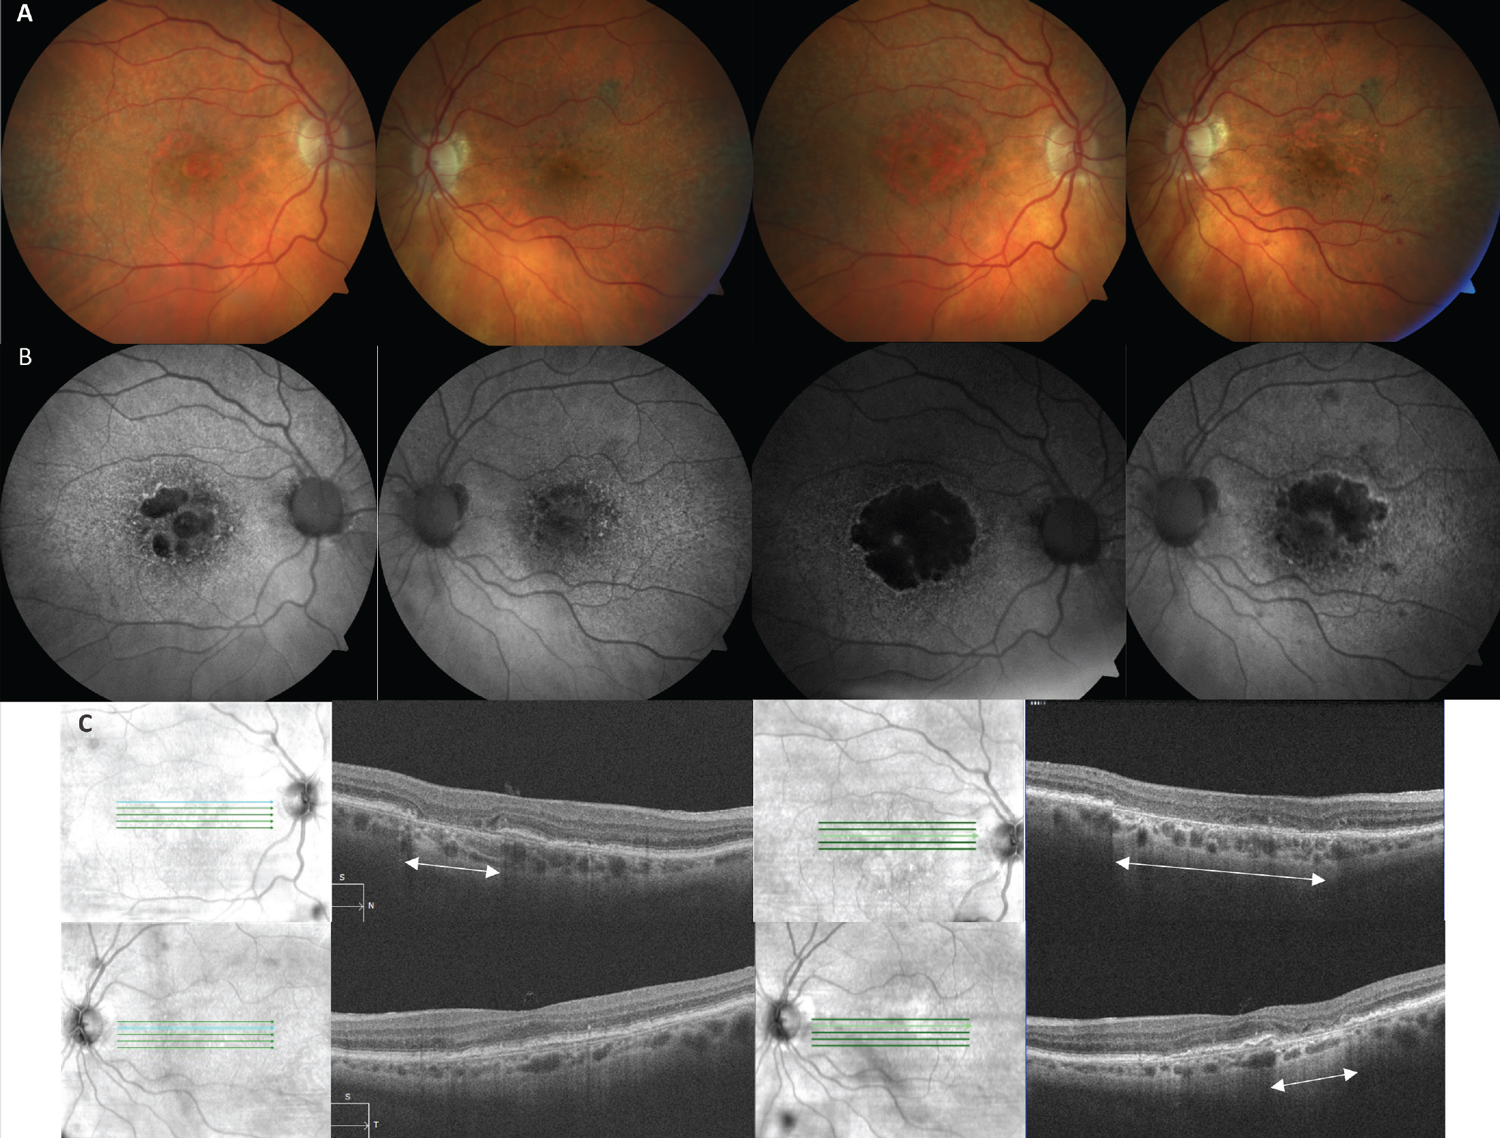 Fig. 4. (A) Color fundus photos of a 90-year-old Caucasian female with bilateral GA AMD. The images on the left are baseline and on the right are 29 months later. (B) FAF images on the left highlight hypoautofluorescence of multifocal lesions of GA in both eyes (OD>OS) that on the right side have expanded and coalesced over time. (C) SD-OCT image of the right eye (top left) shows an area of cRORA (white arrows) that expanded to a much wider lesion (top right). The left eye OCT at baseline (bottom left) did not have cRORA, which then developed after 29 months (bottom right). 